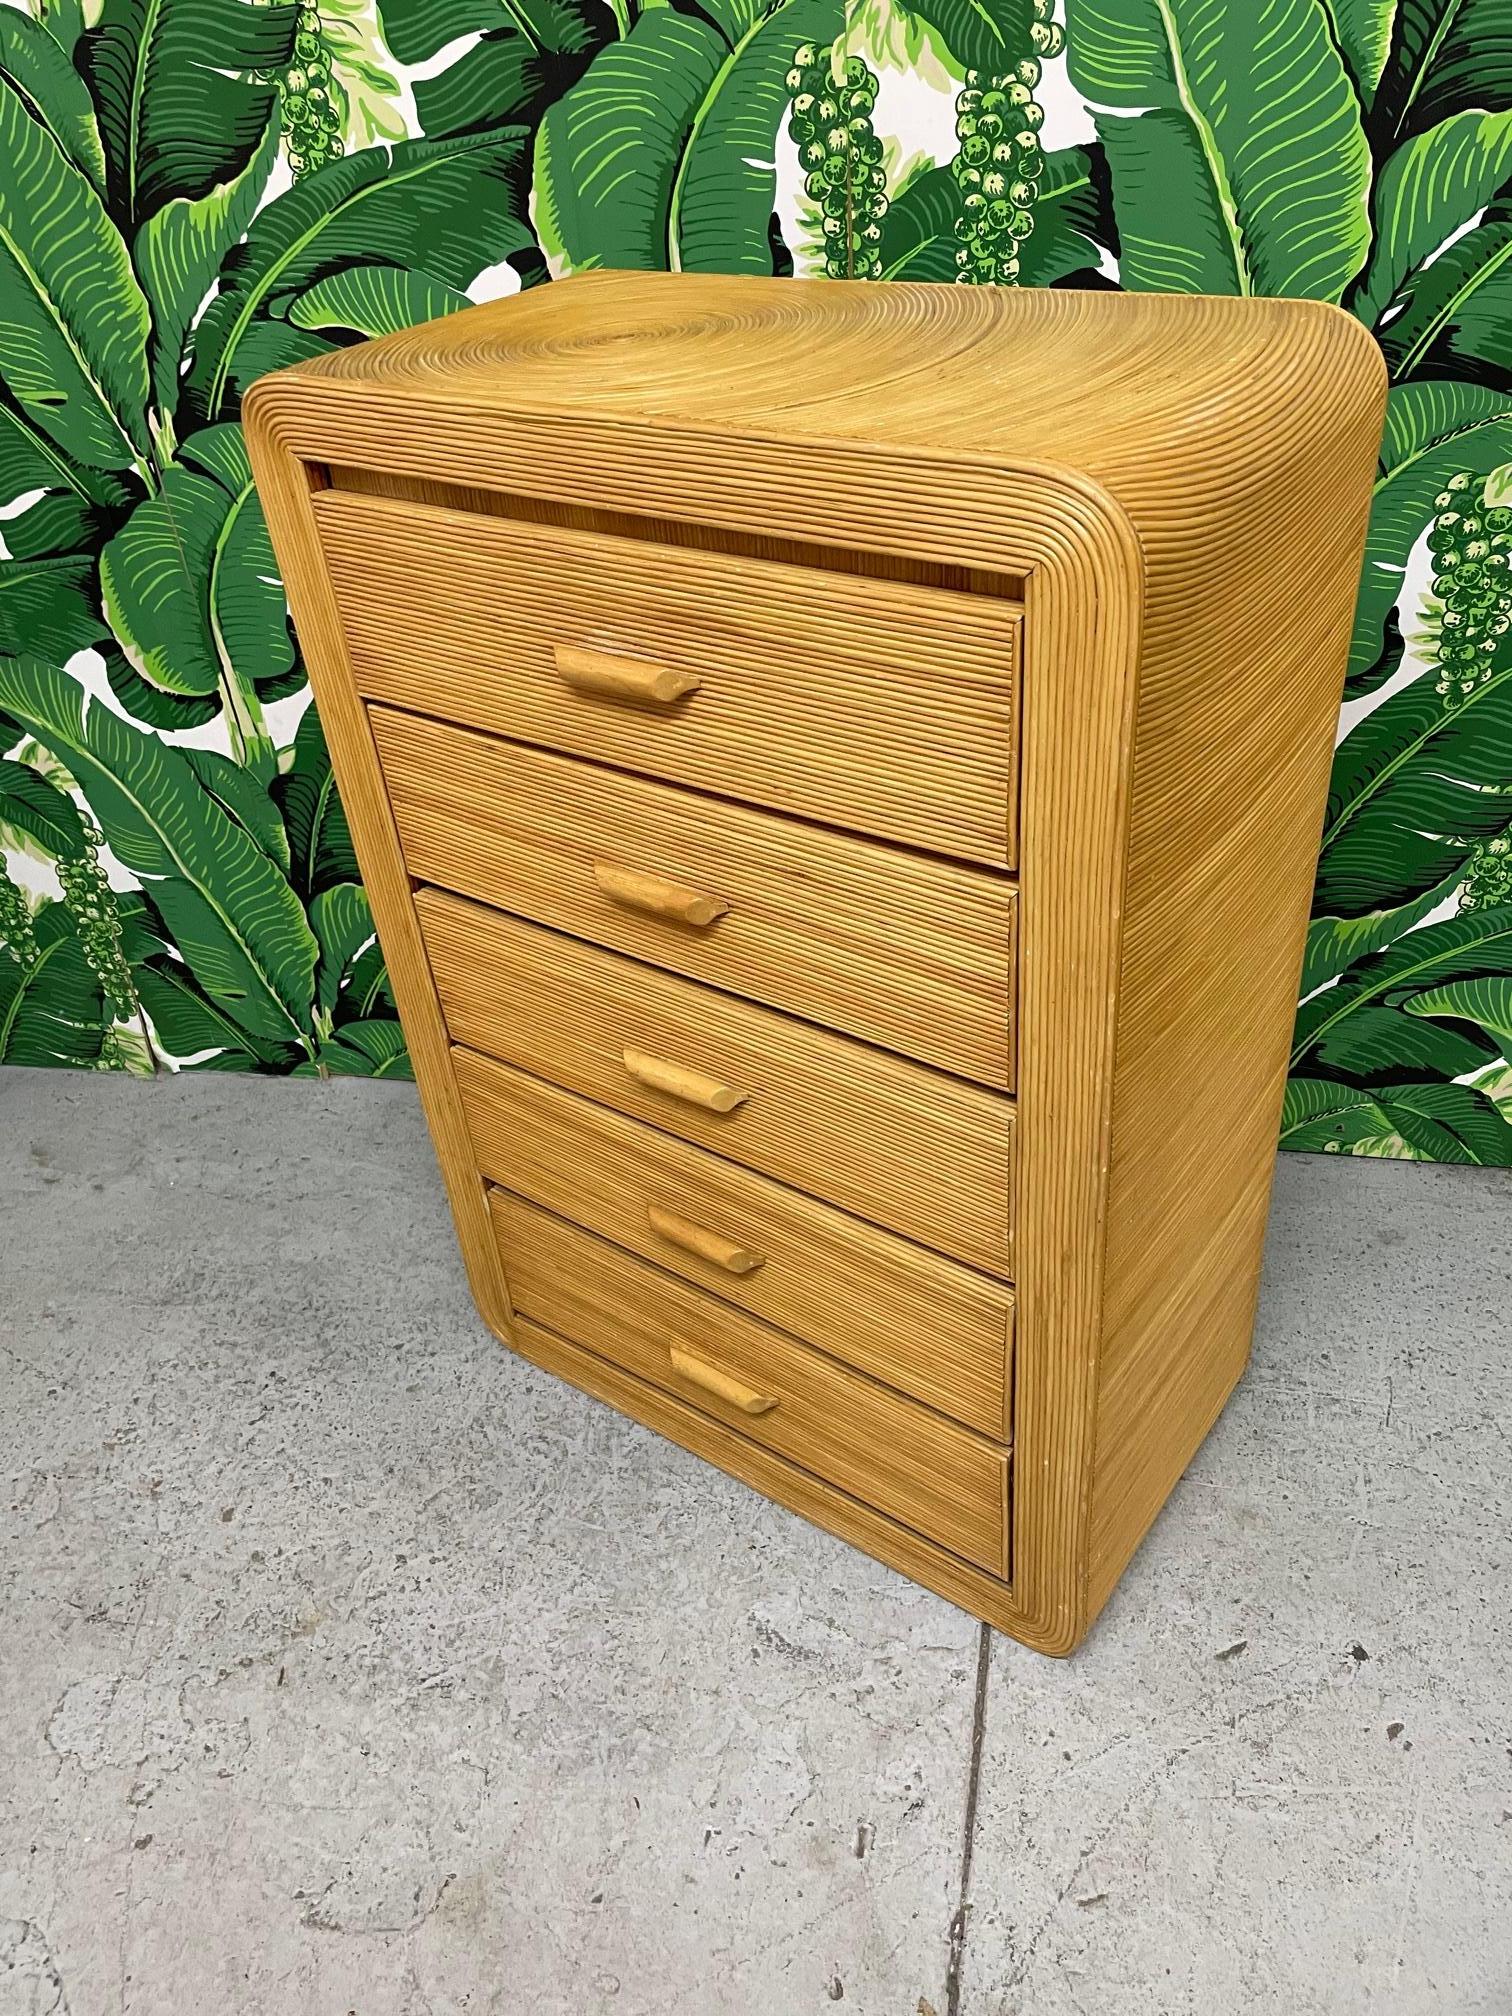 Rattan dresser features a full veneer of pencil reed rattan in a rising sun pattern echoing the designs by Gabriella Crespi. Good condition with minor imperfections consistent with age.

 